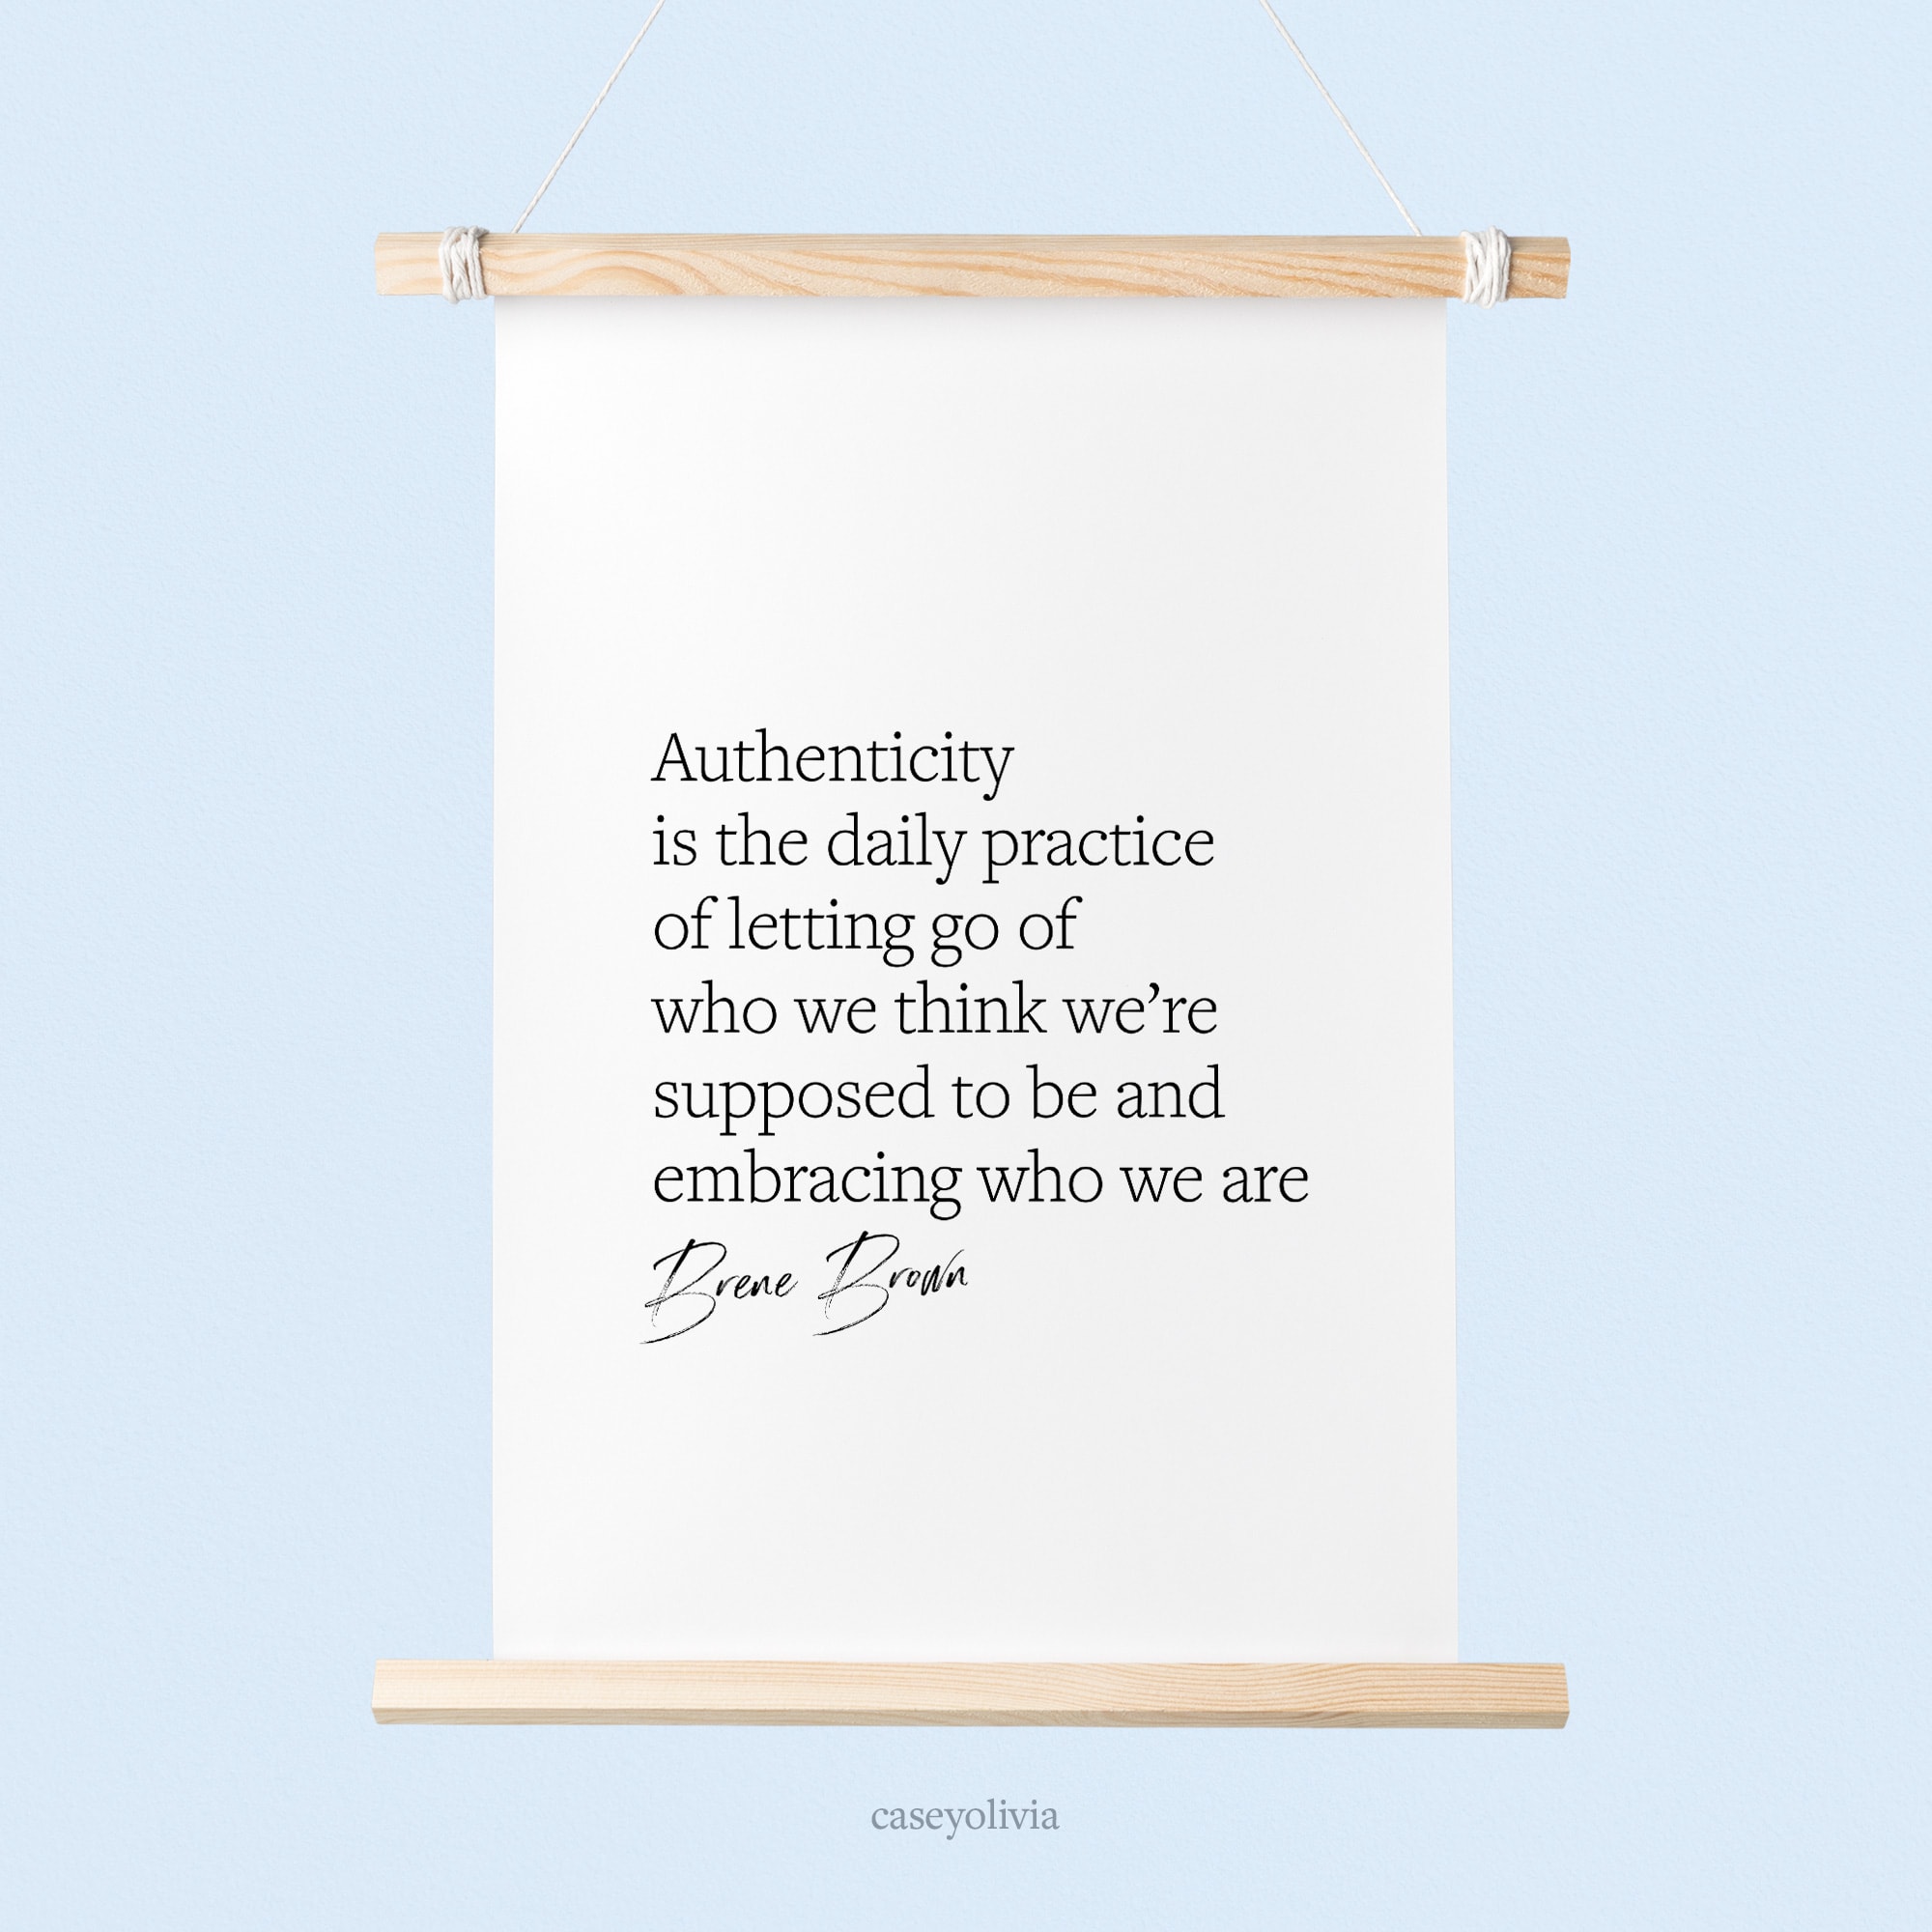 brene brown all art to hang in office with quote about being who you are